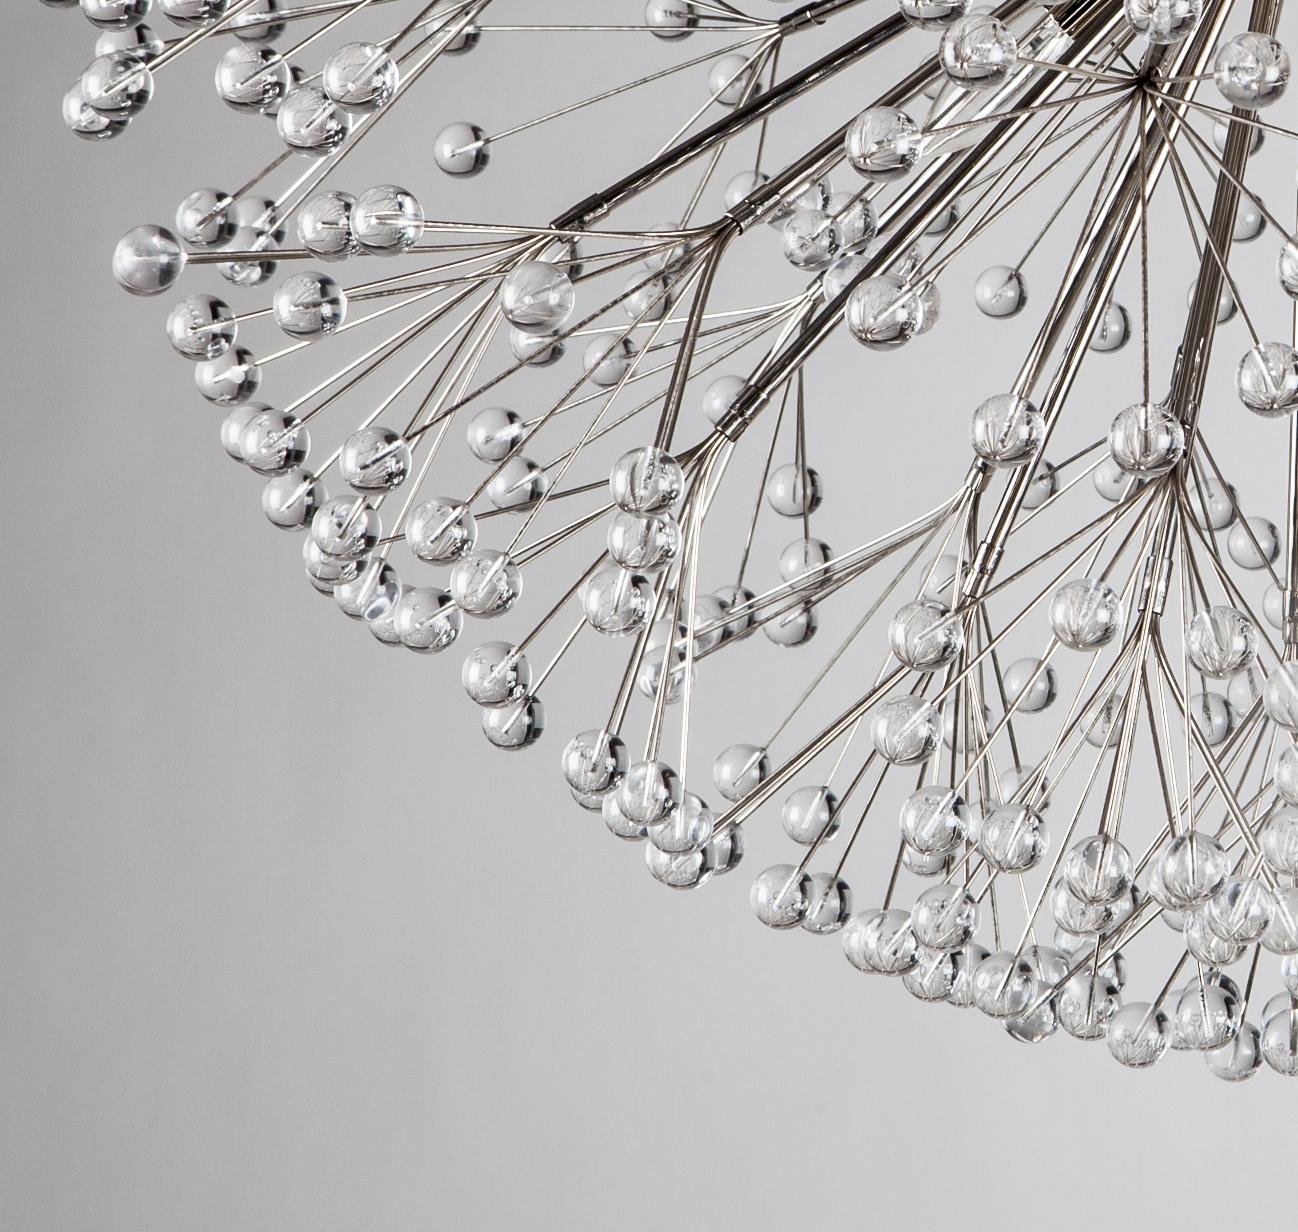 Modern Nickel Dandelion 32 Chandelier Designed by Tony Duquette for Remains Lighting